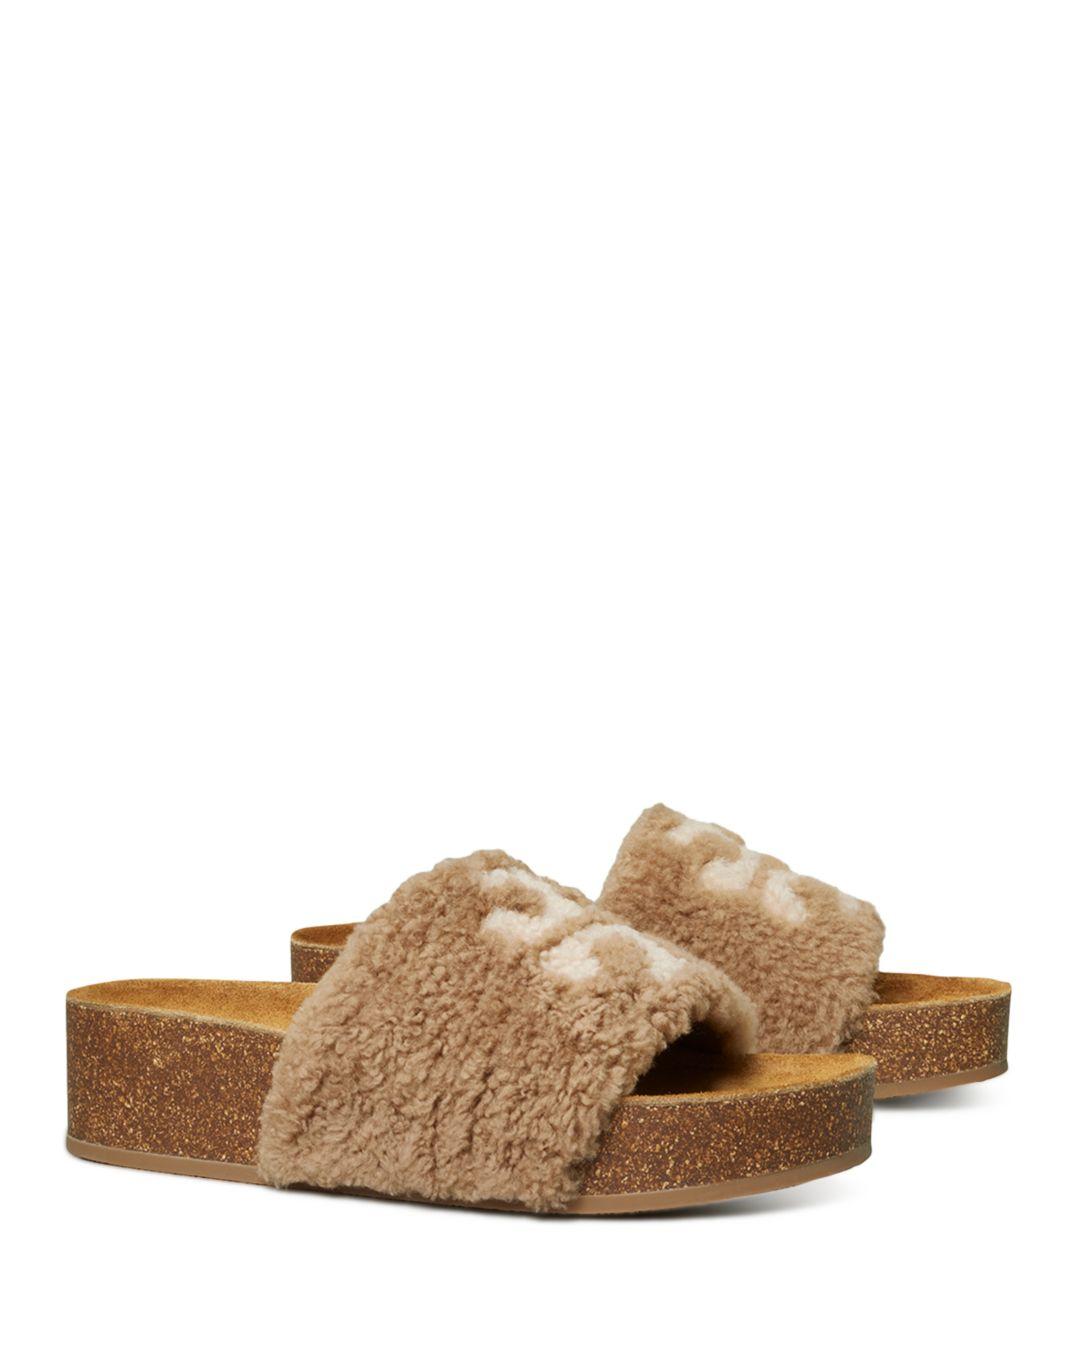 Tory Burch Double T Shearling Flatform Slide Sandals in Brown | Lyst